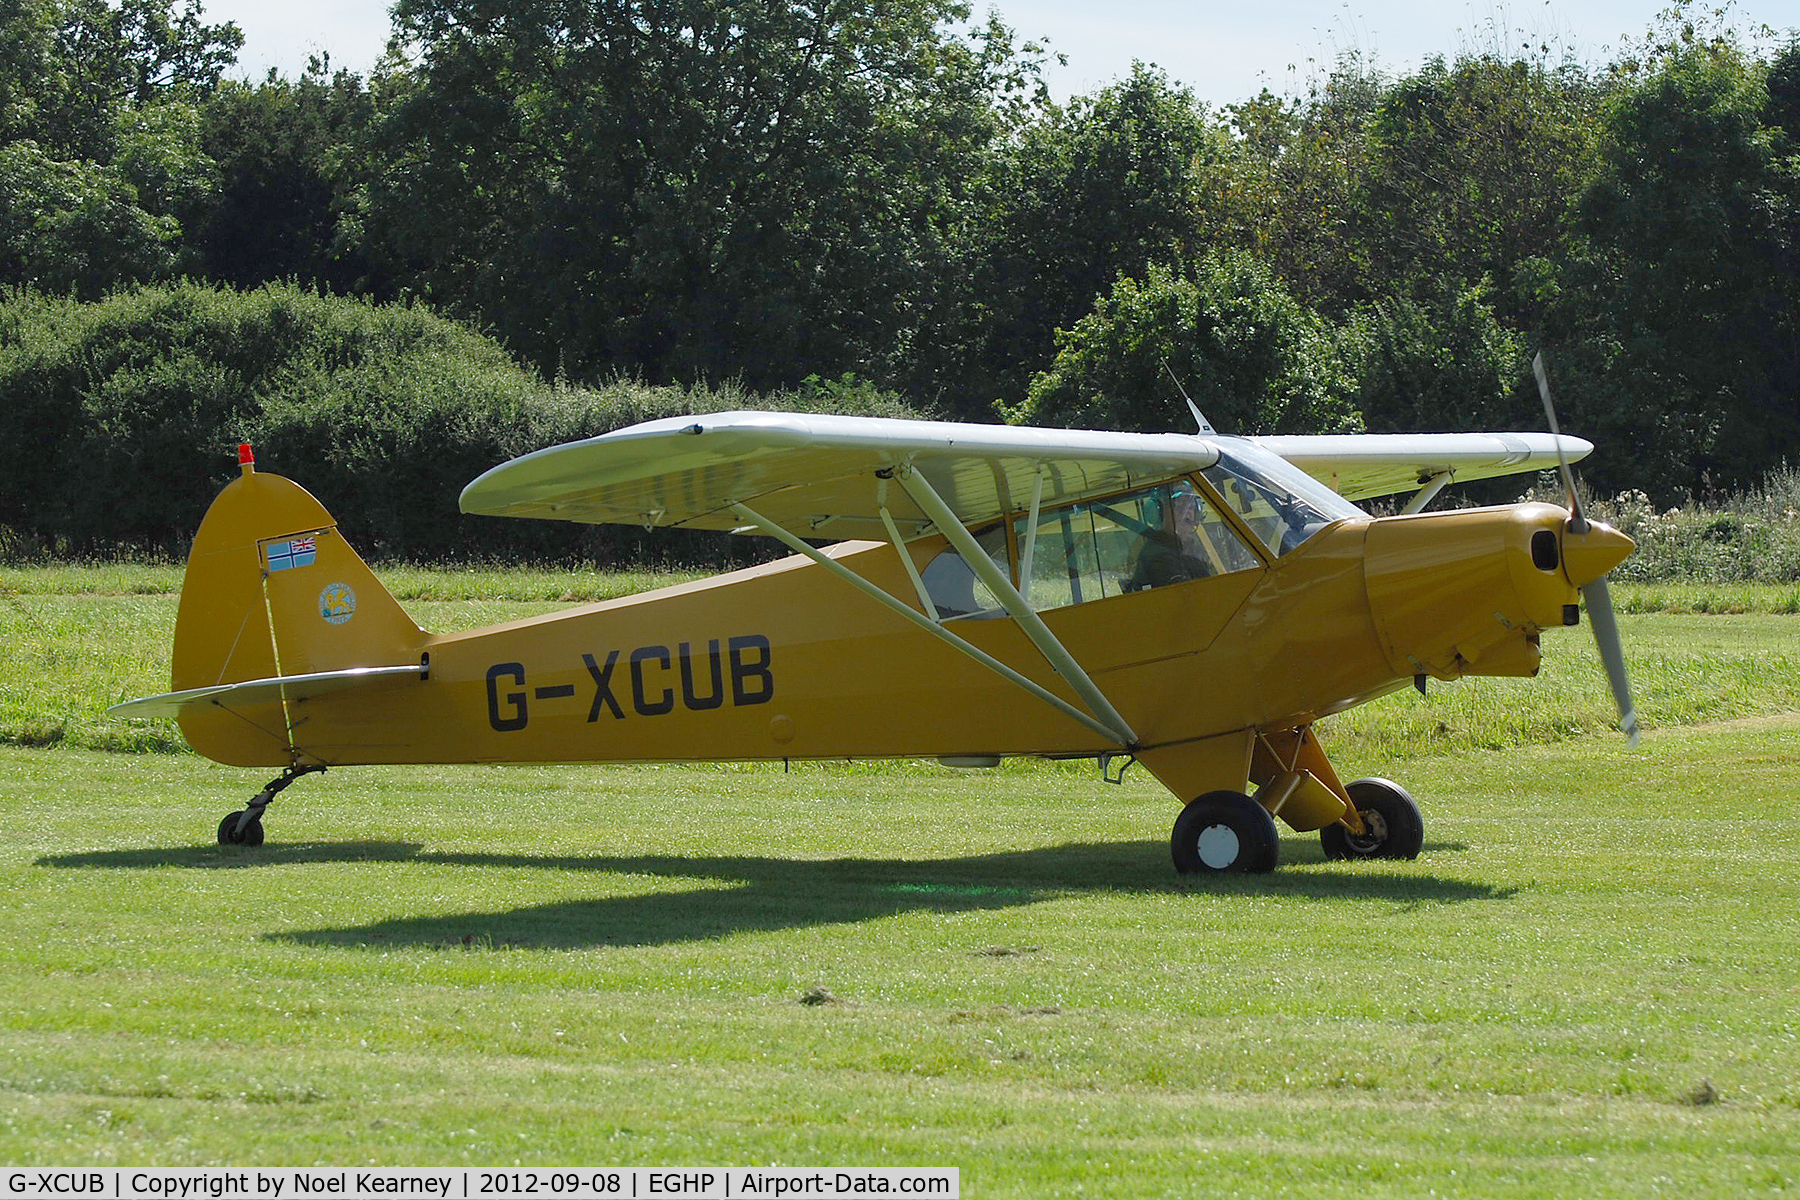 G-XCUB, 1981 Piper PA-18-150 Super Cub C/N 18-8109036, Photographed at the Vintage Fly-in at Popham Airfield Sept '12